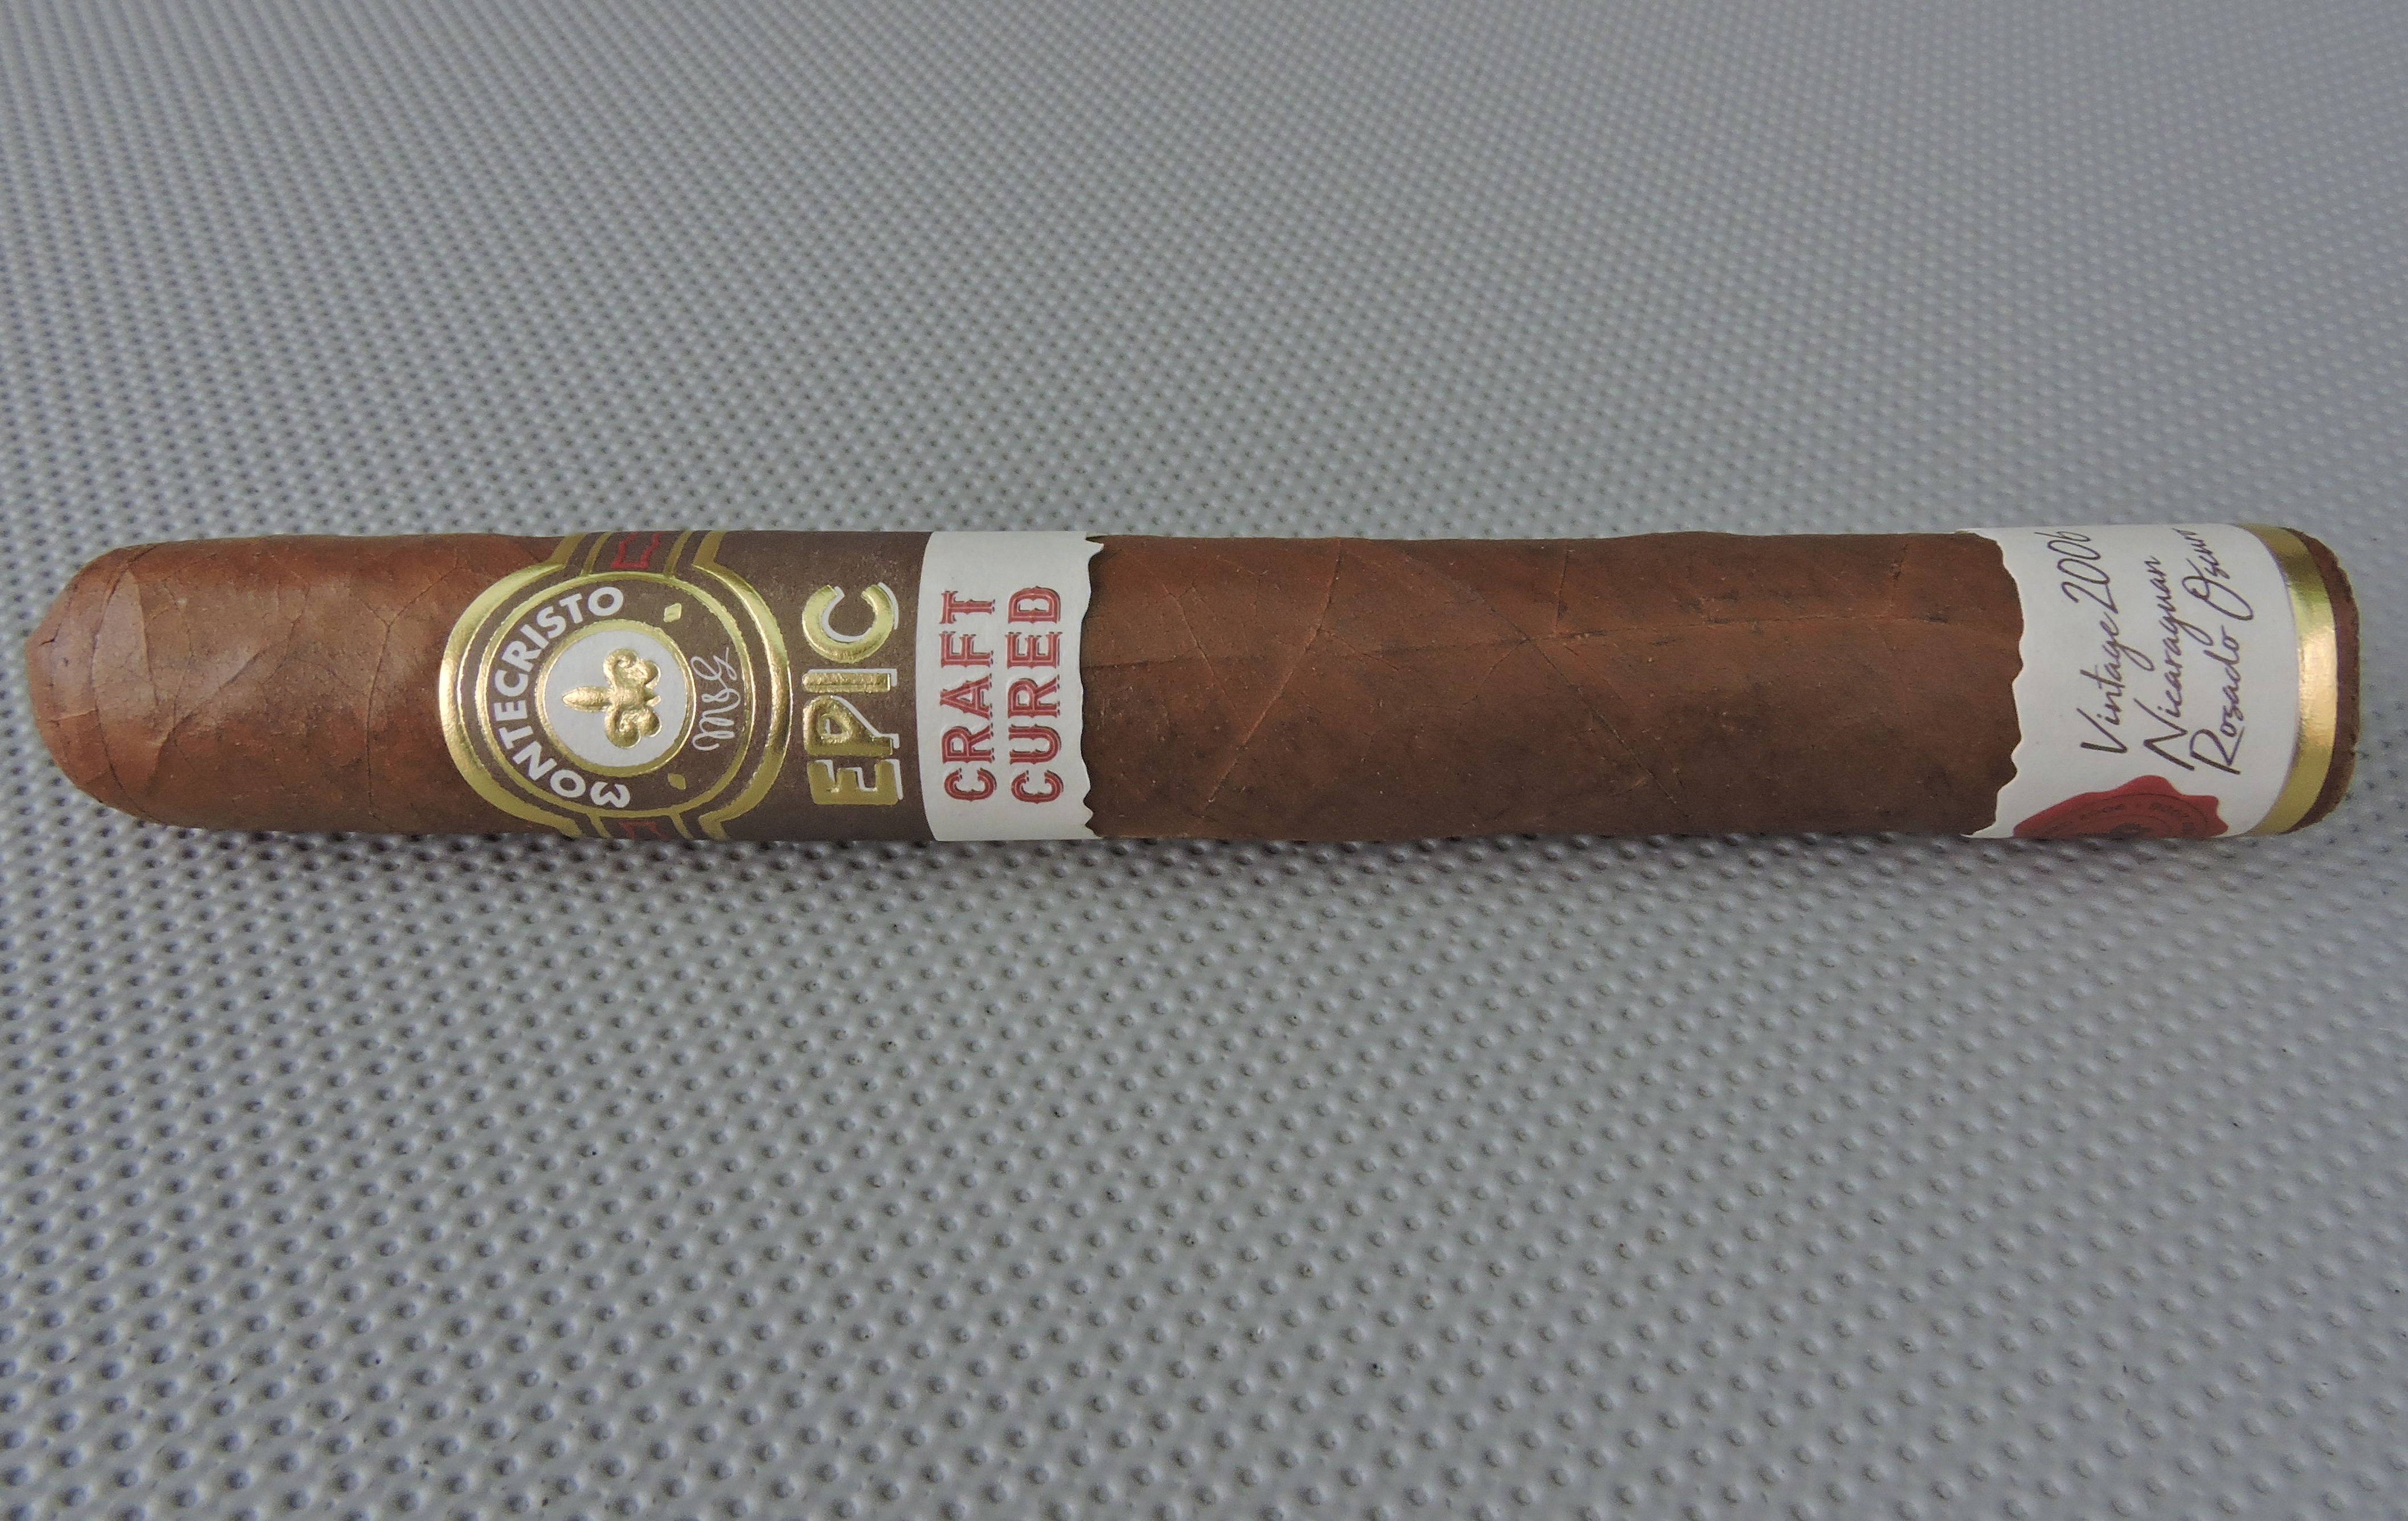 Montecristo Epic Craft Cured by Altadis U.S.A